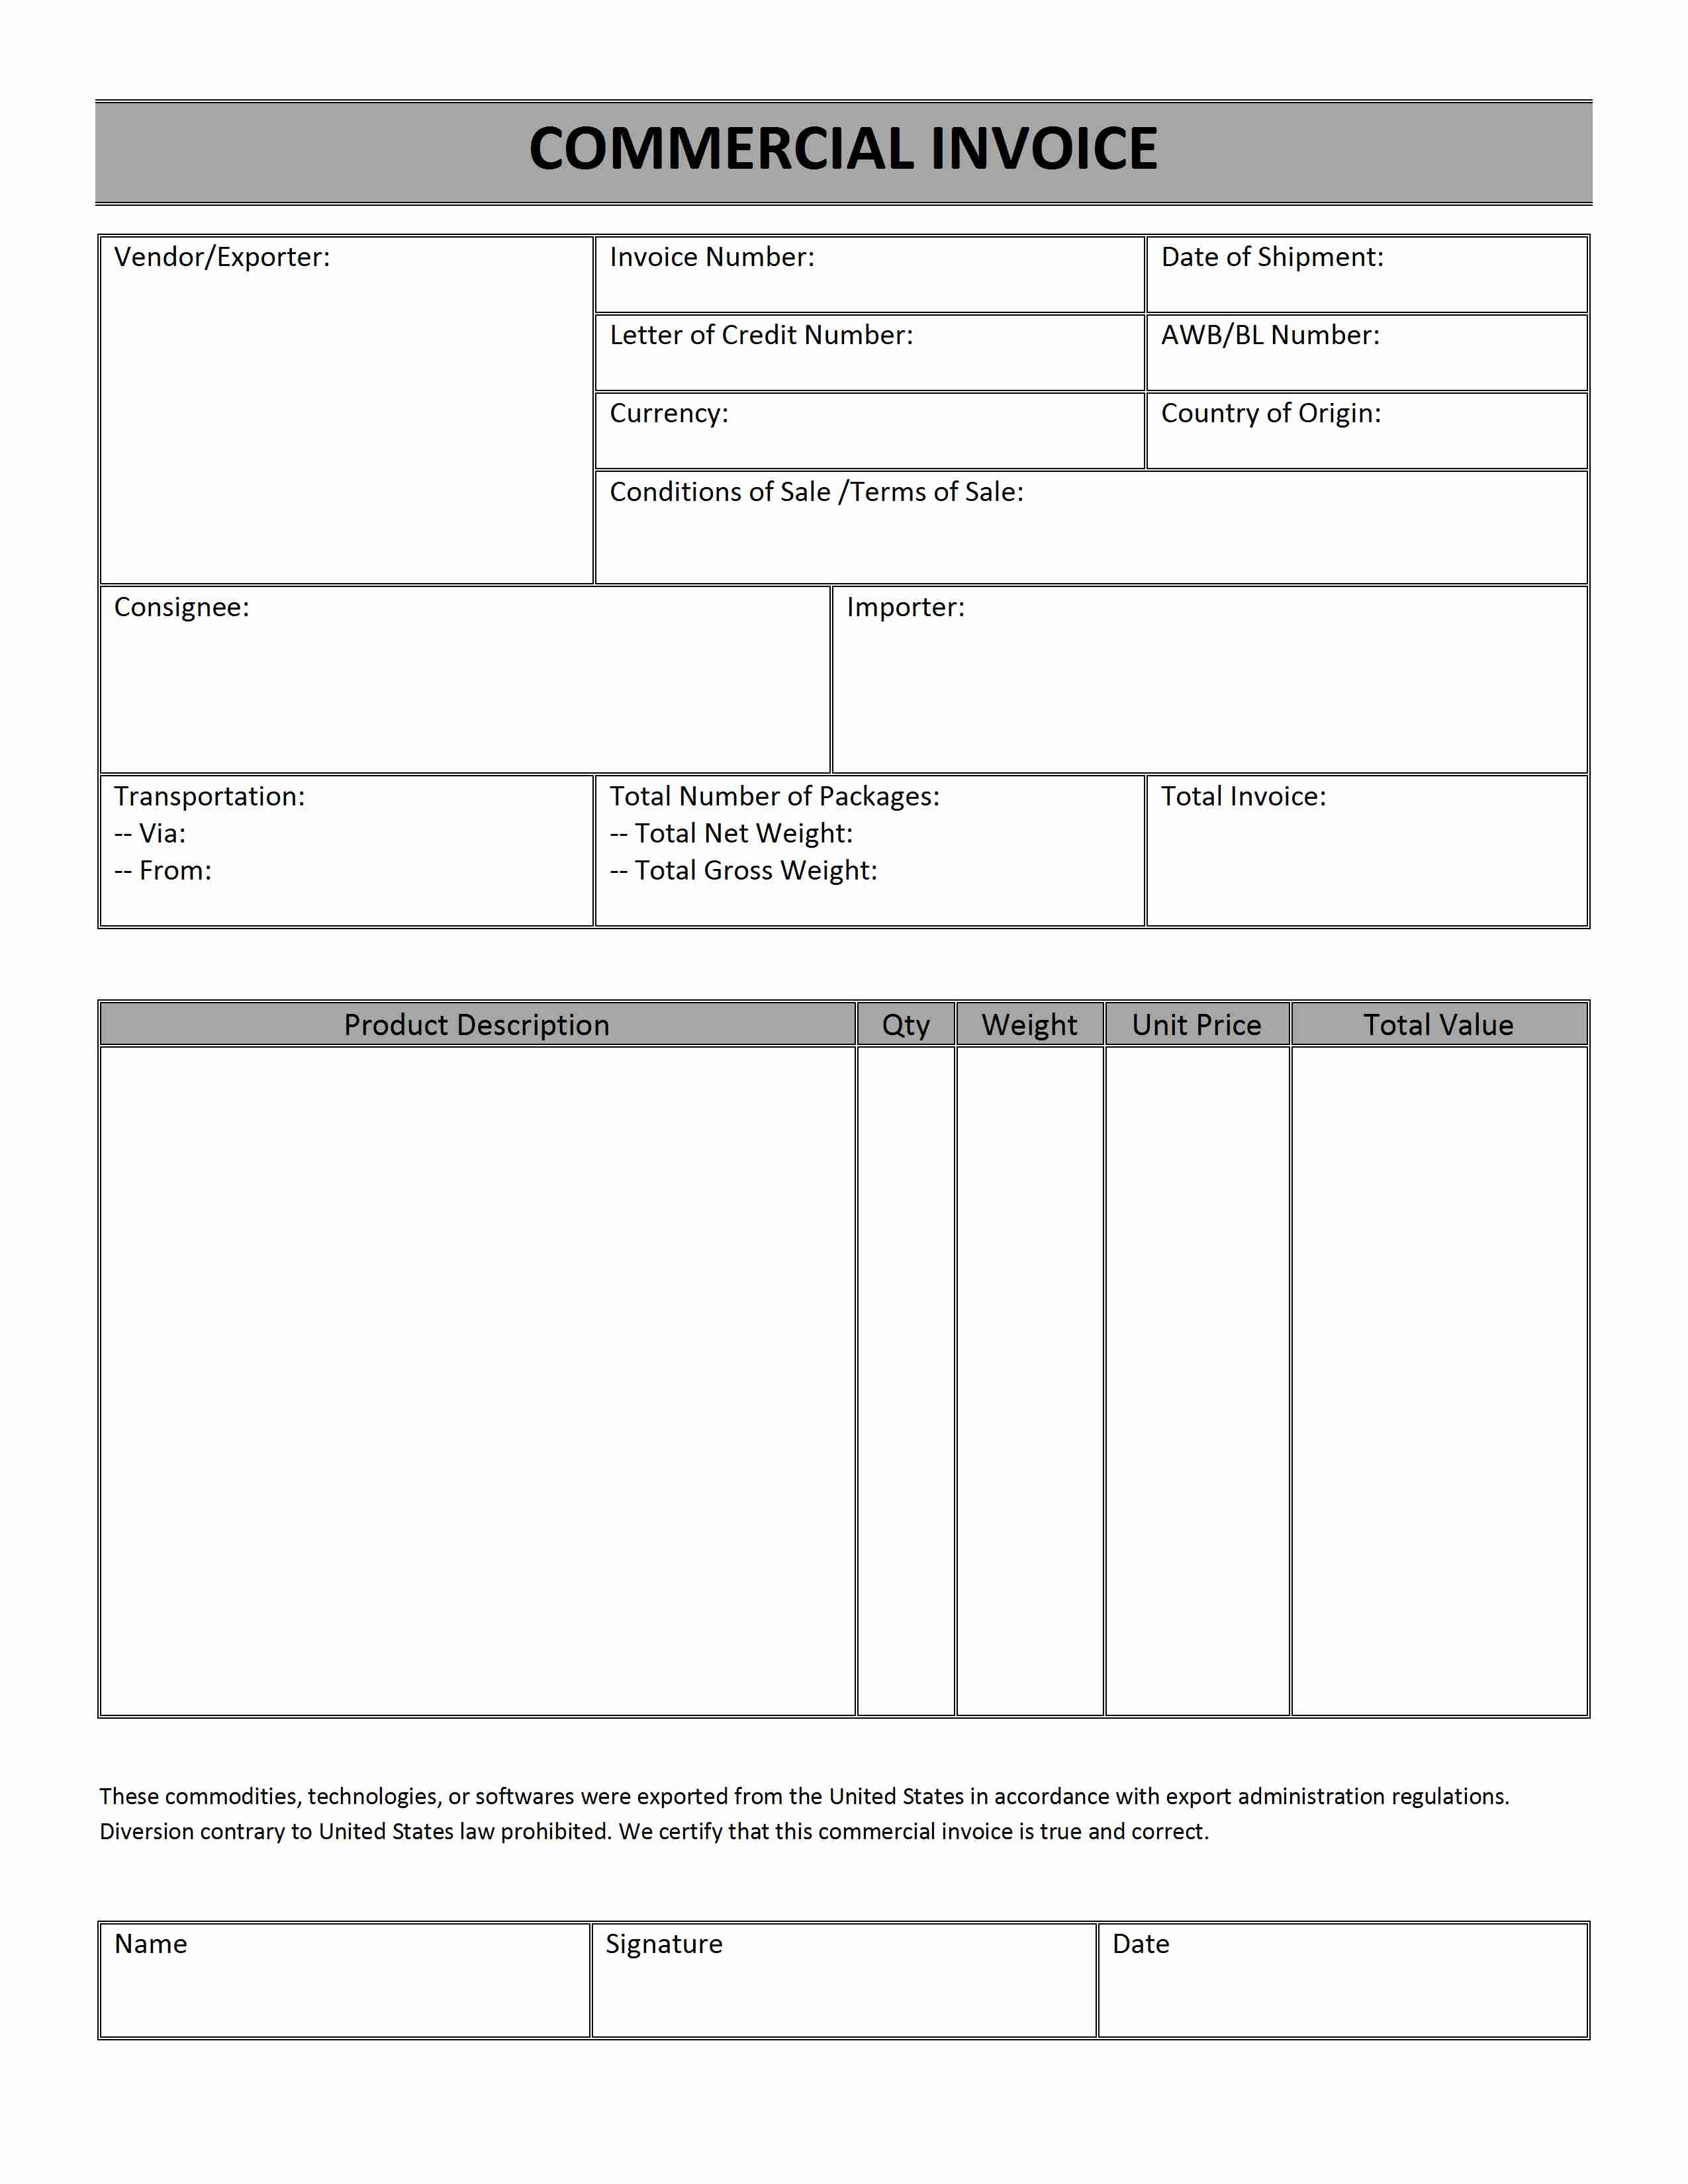 template of commercial invoice